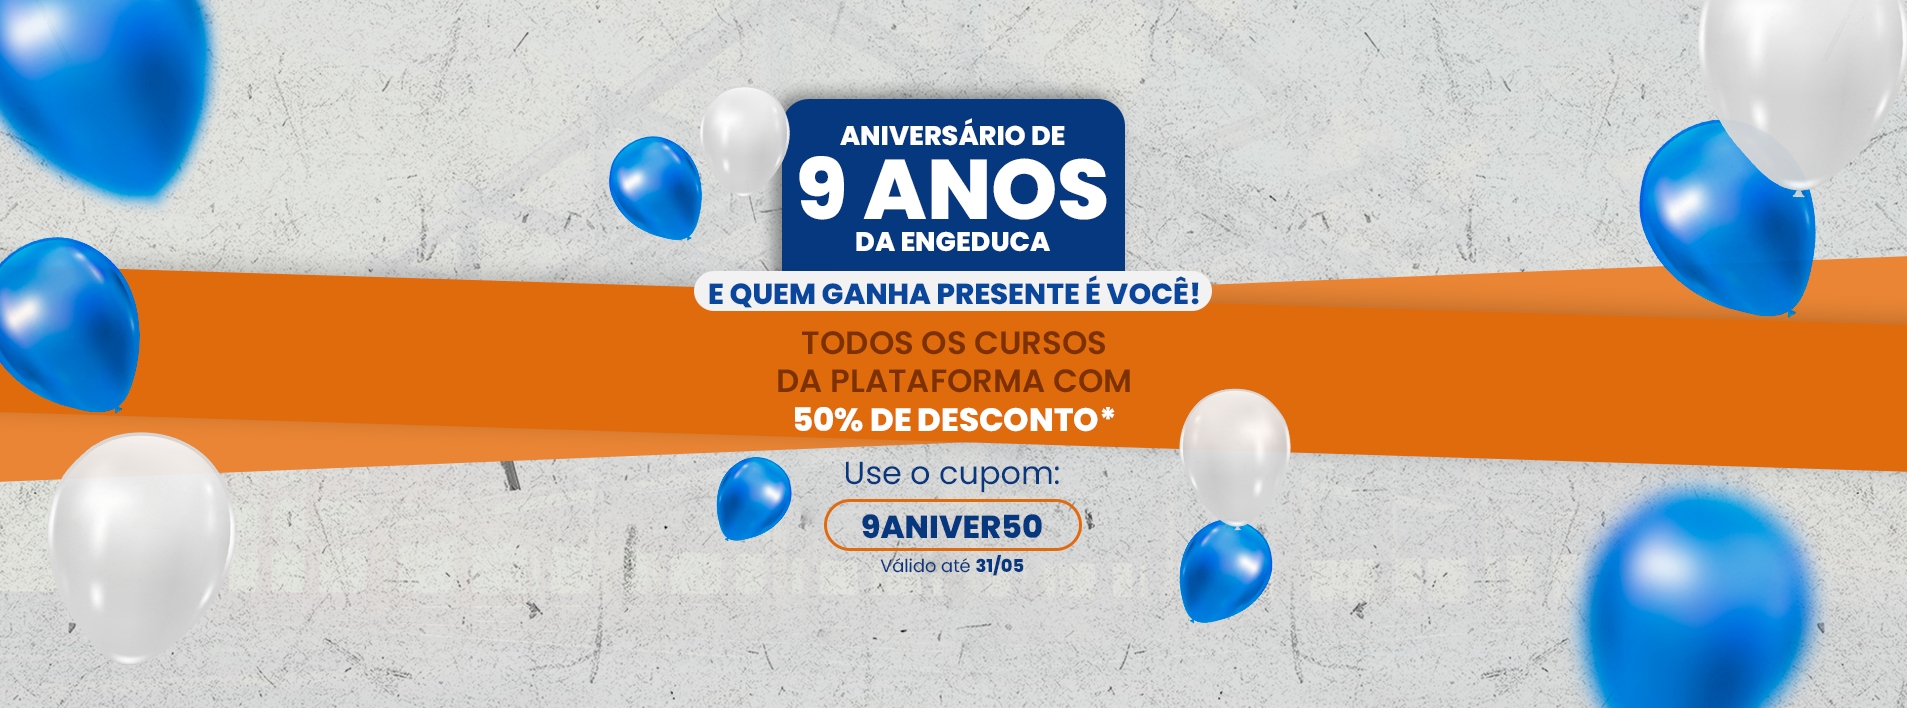 Banner site anivers%c3%a1rio engeducabanner imers%c3%a3o estruturas met%c3%a1licas